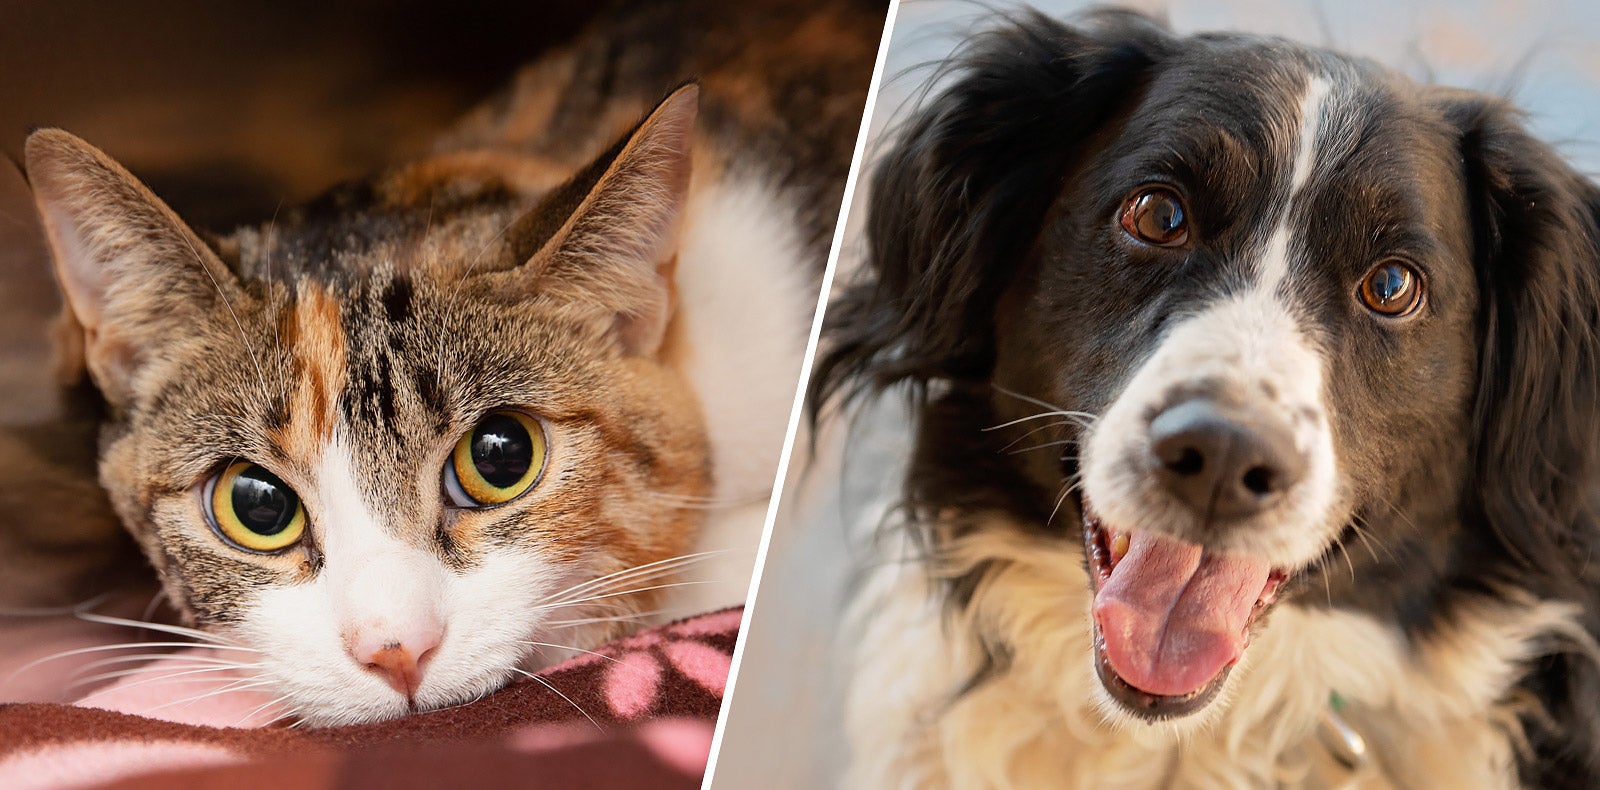 Adoptable cat and dog at Best Friends Animal Sanctuary